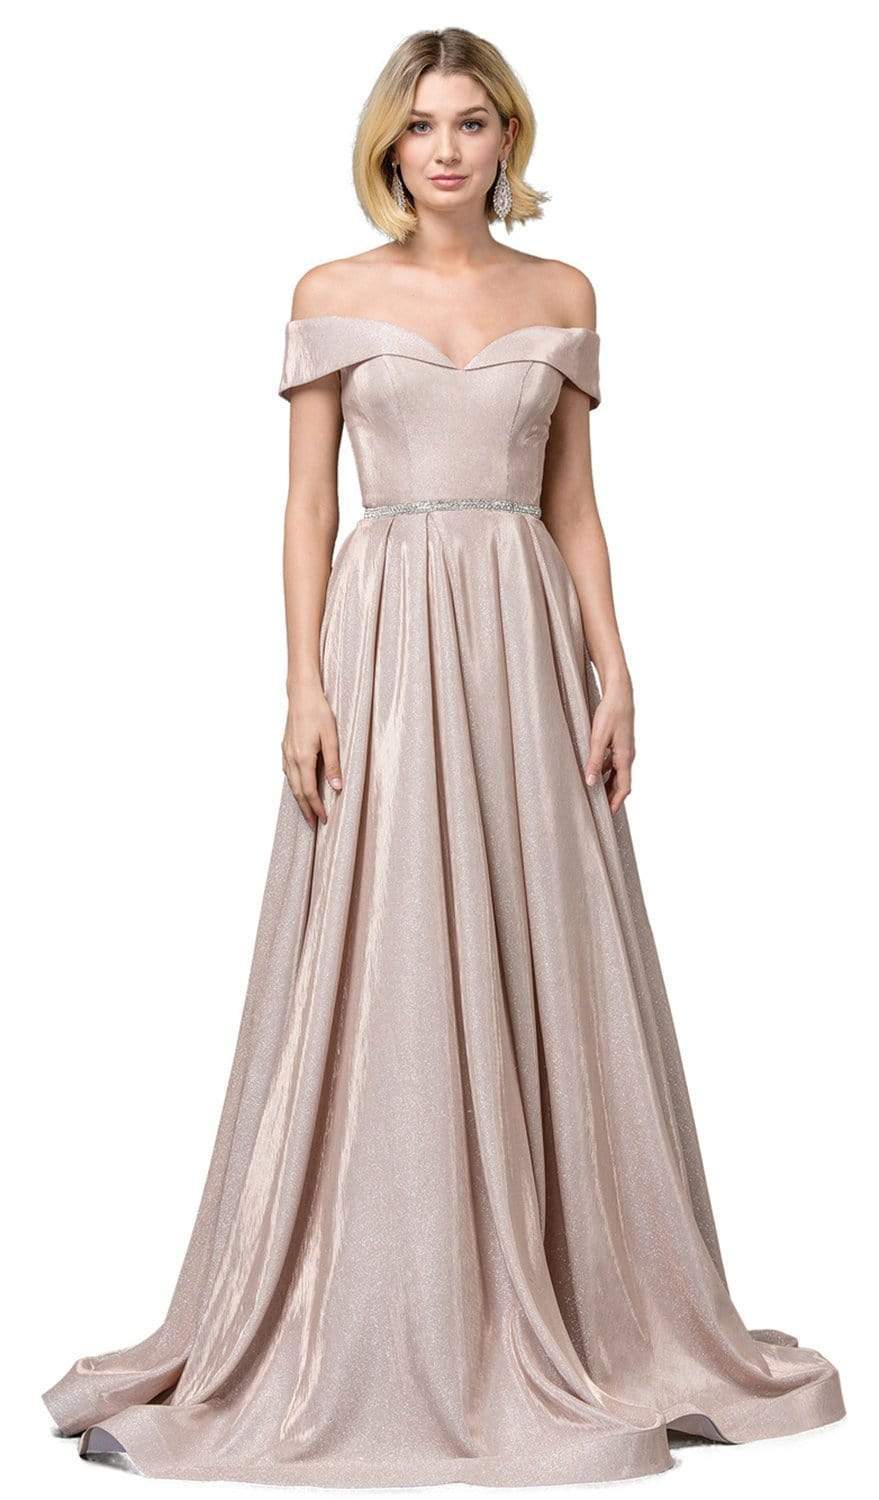 Image of Dancing Queen - 2824 Iridescent Off Shoulder Gown with High Slit